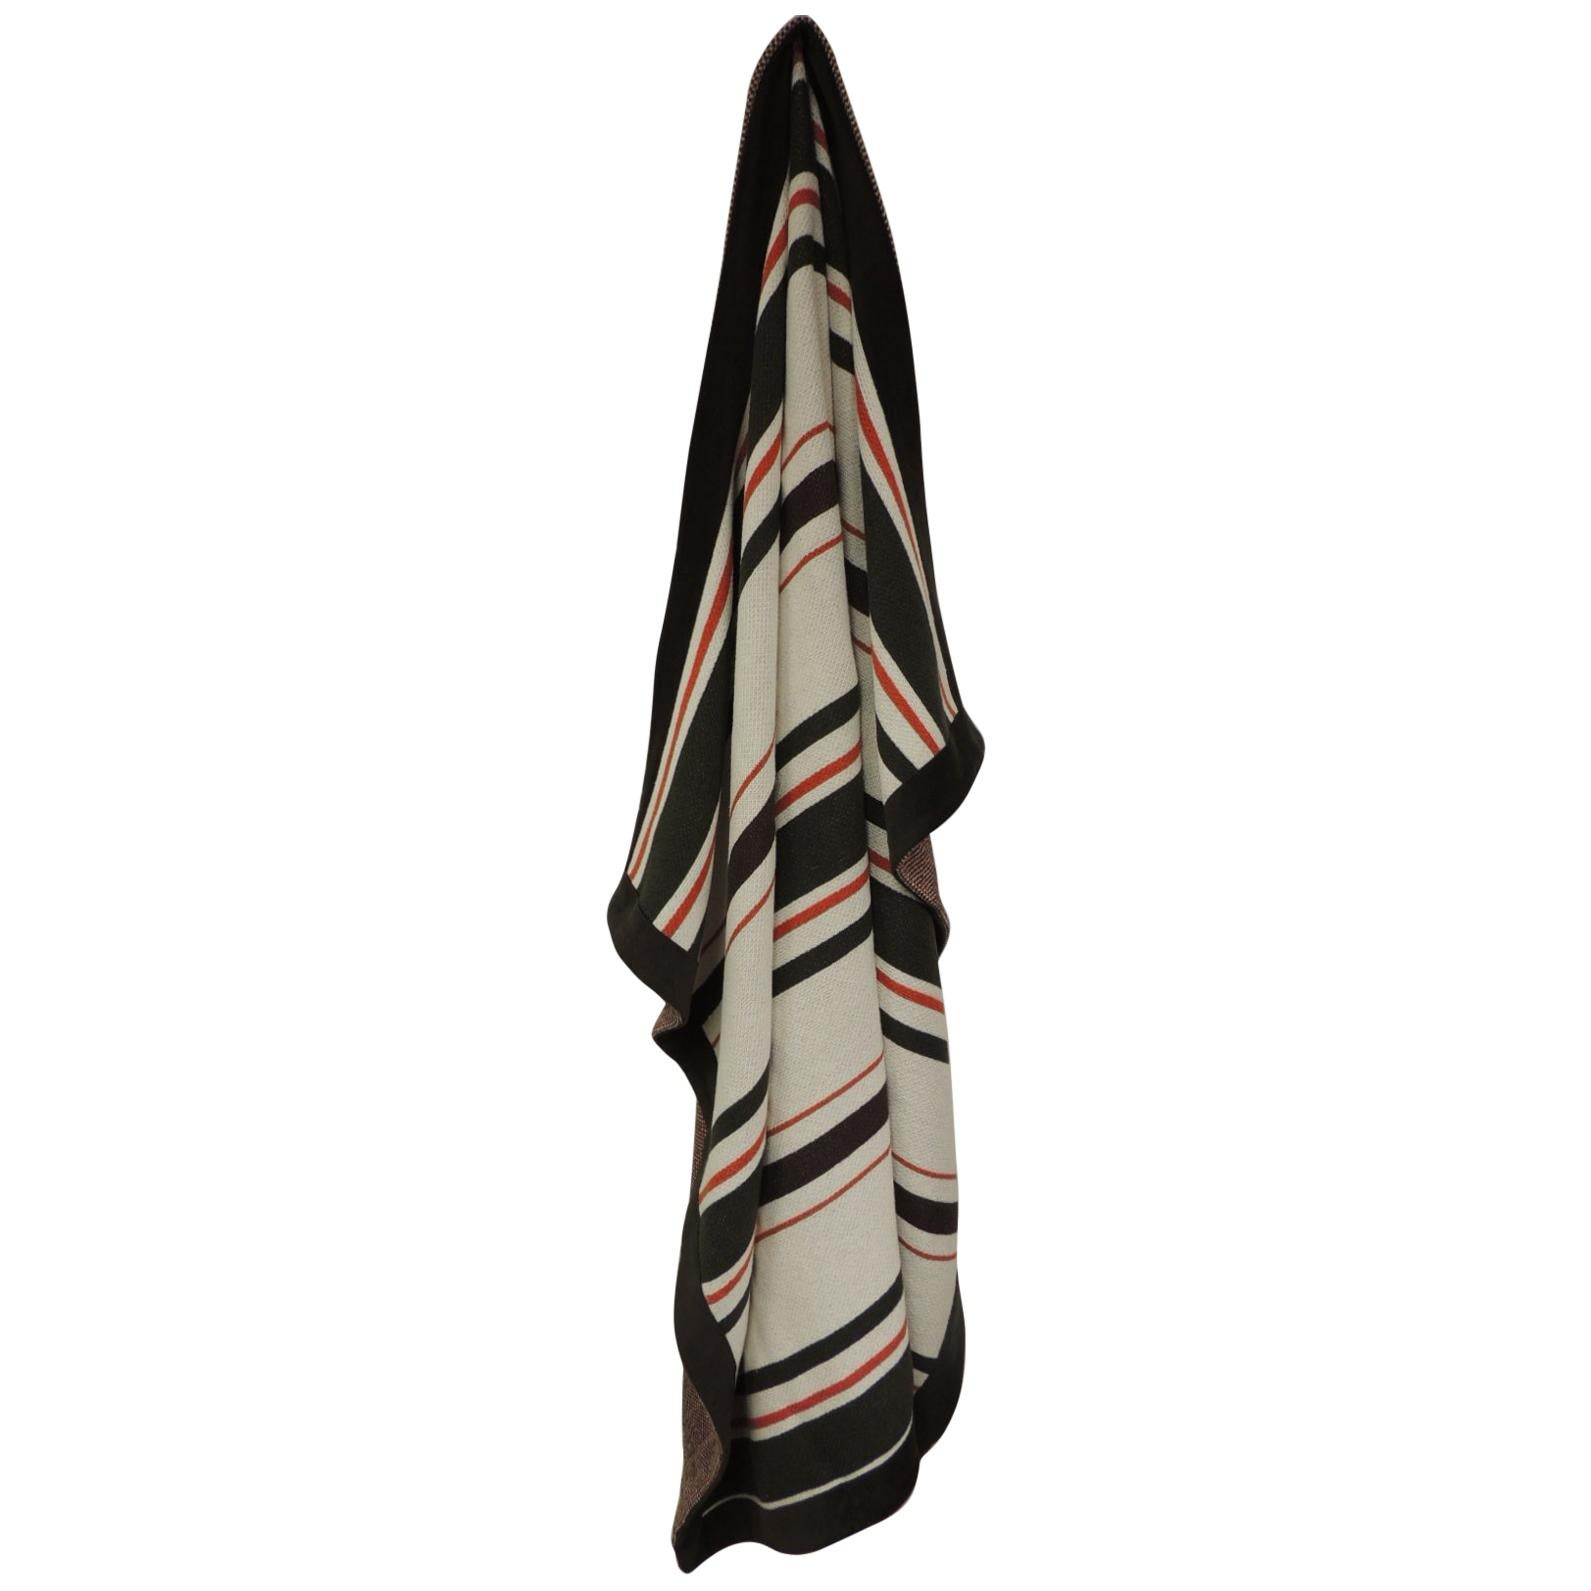 Large brown and orange stripes Alessandra Branca throw with faux suede trim all
around and reversible red, brown and white tweet woven fabric.
Large, heavy throw/blanket.
Size: 66